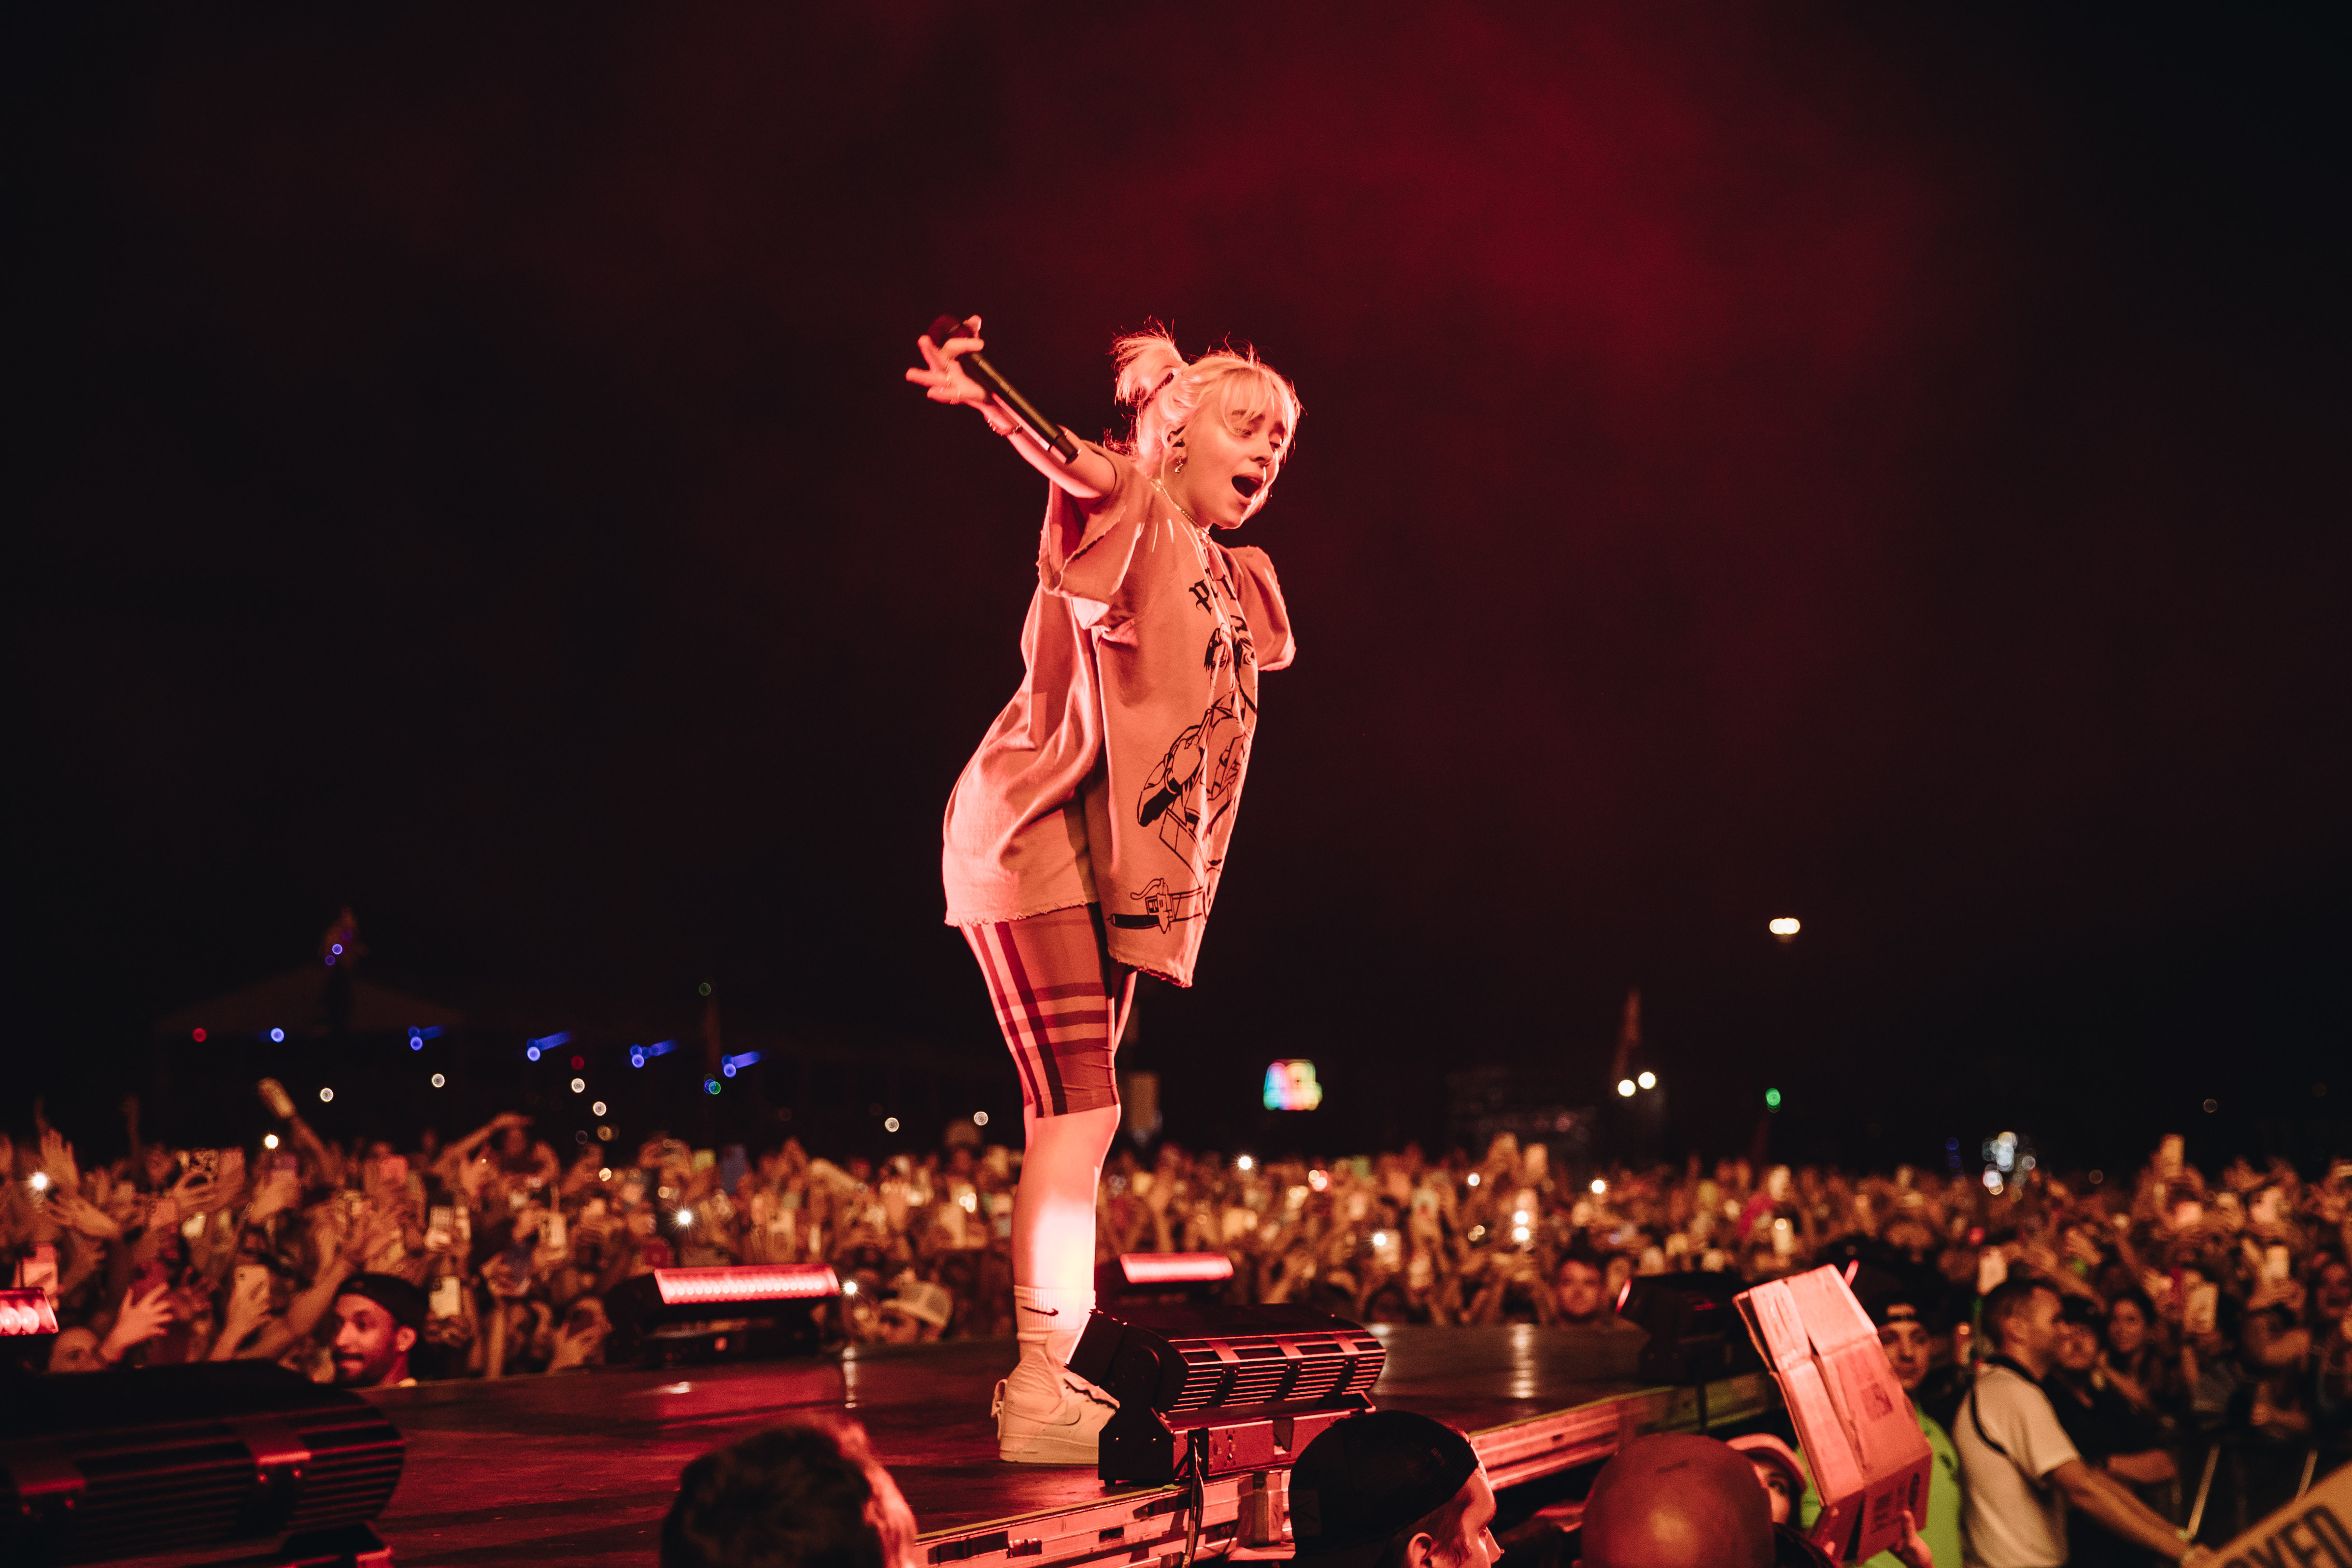 AUSTIN, TEXAS - OCTOBER 02: Billie Eilish performs onstage during Austin City Limits Festival at Zilker Park on October 02, 2021 in Austin, Texas. (Photo by Rich Fury/Getty Images)